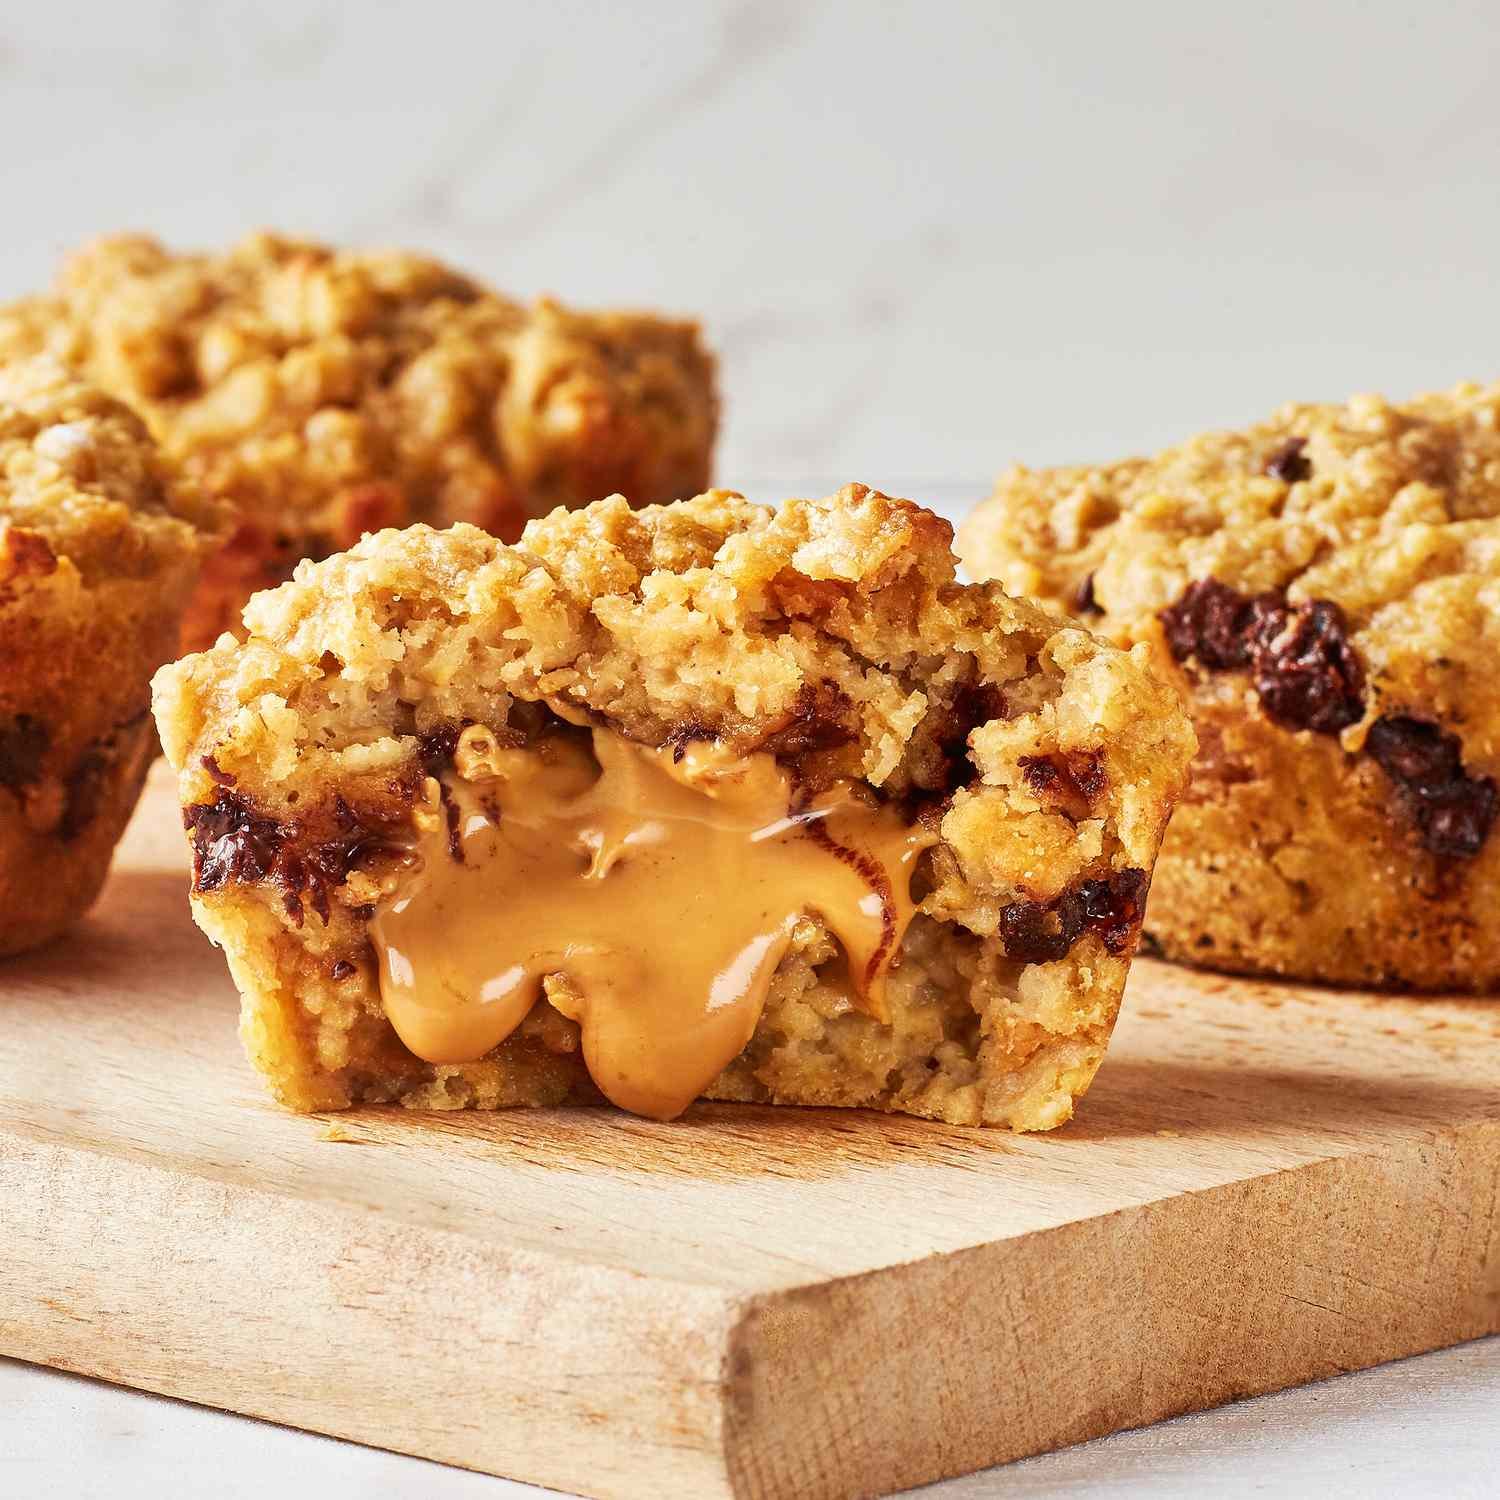 Breakfast Peanut Butter-Chocolate Chip Oatmeal Cakes